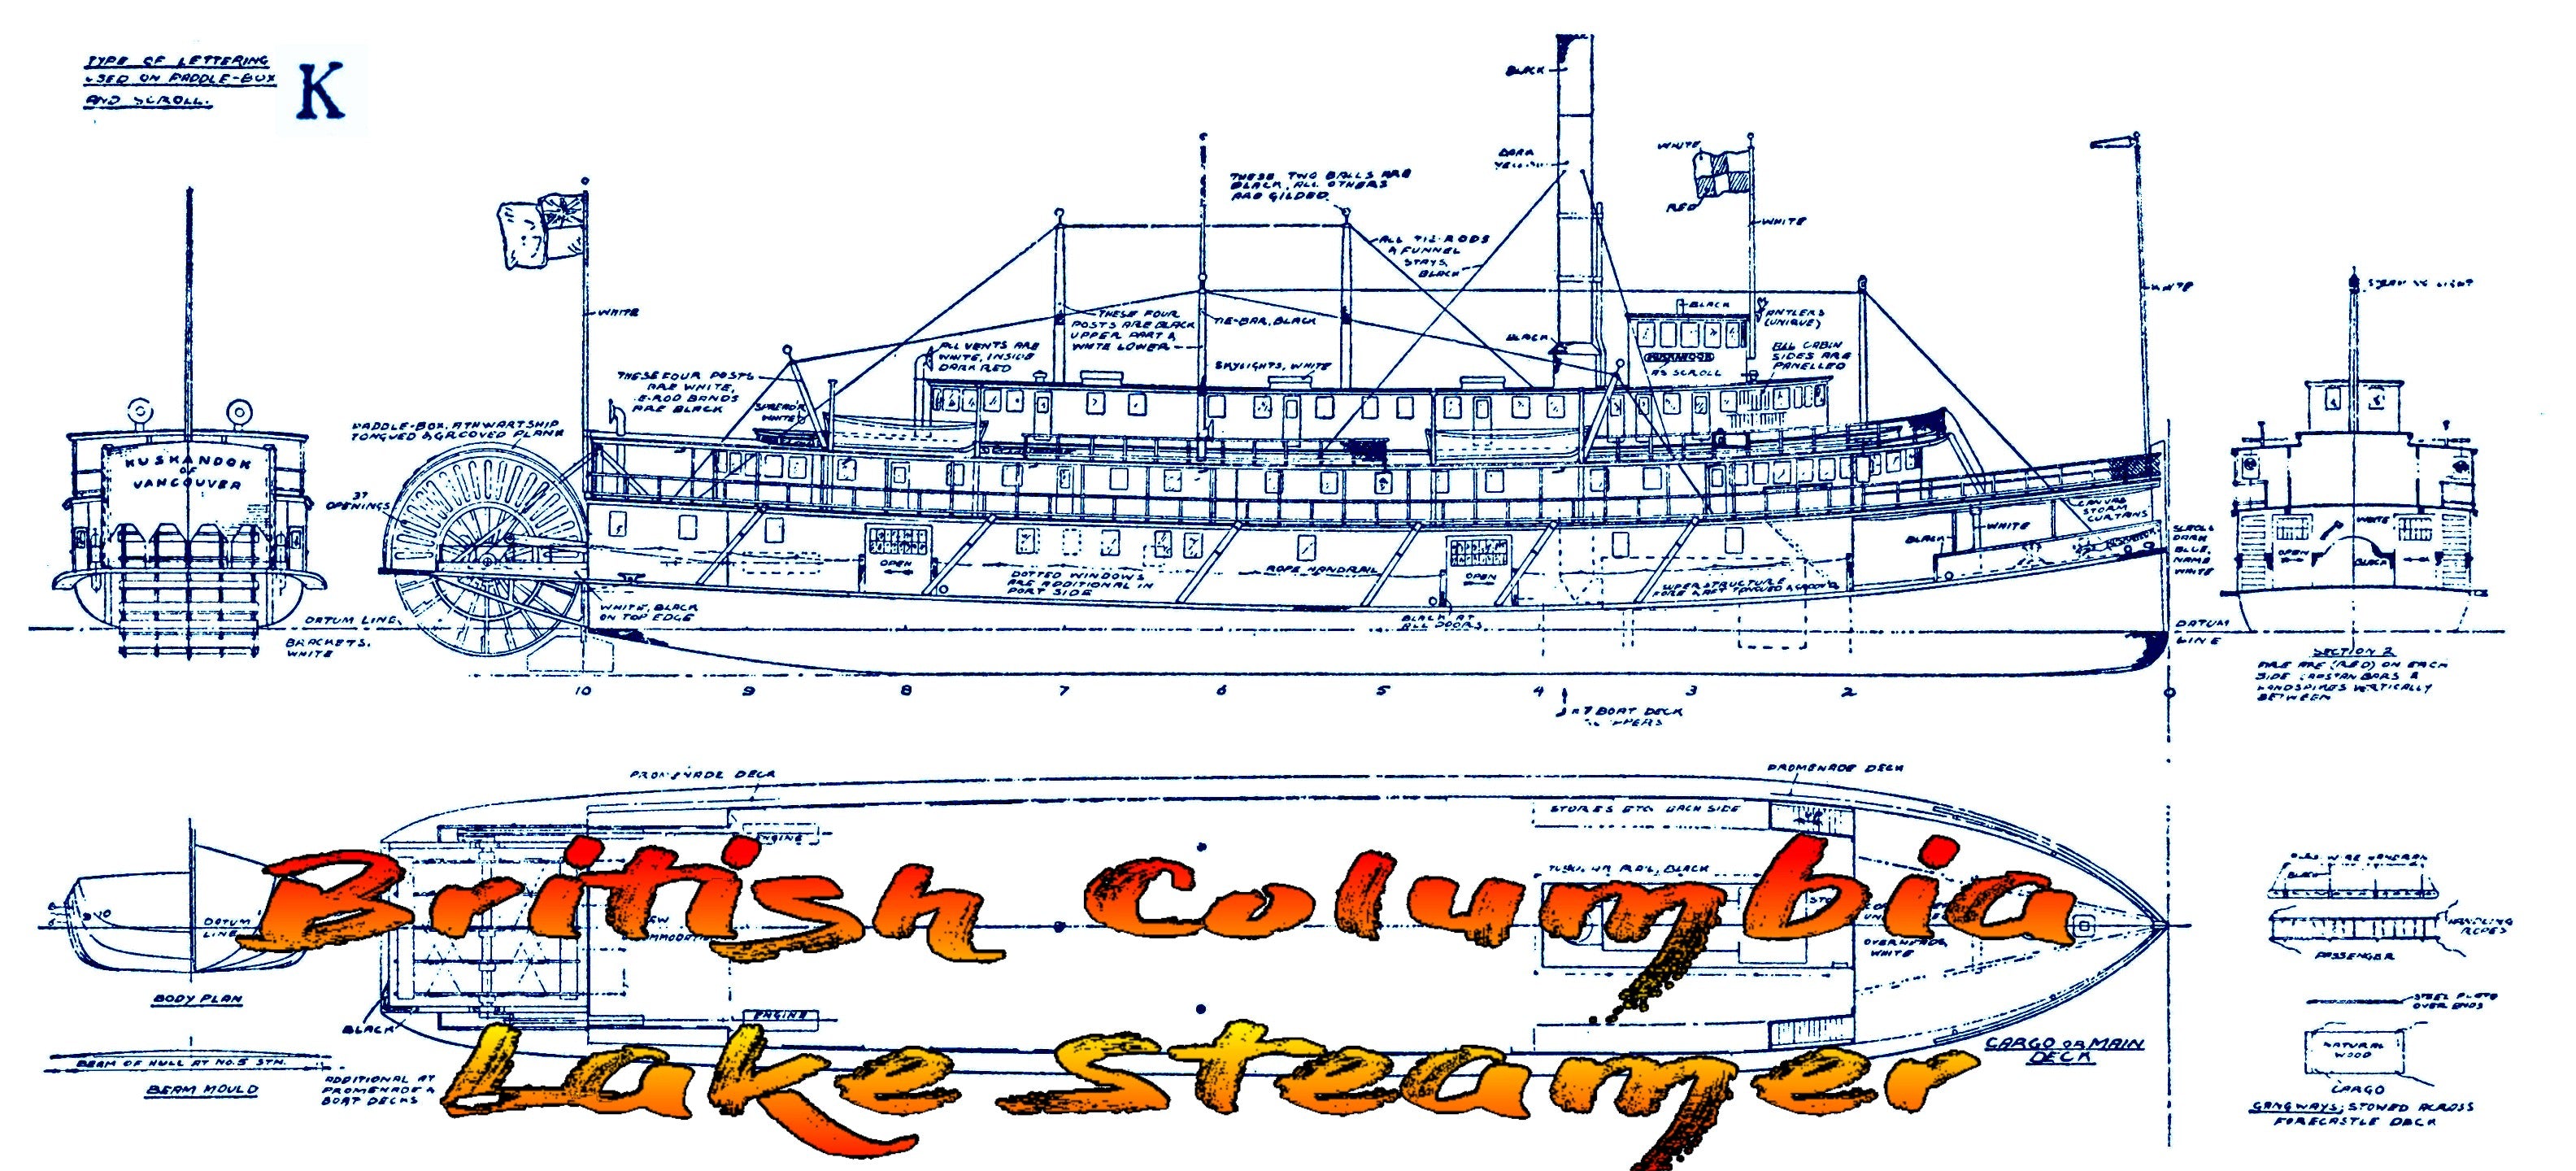 full size printed plan scale 1:72 british columbia lake steamer suitable for display or radio control